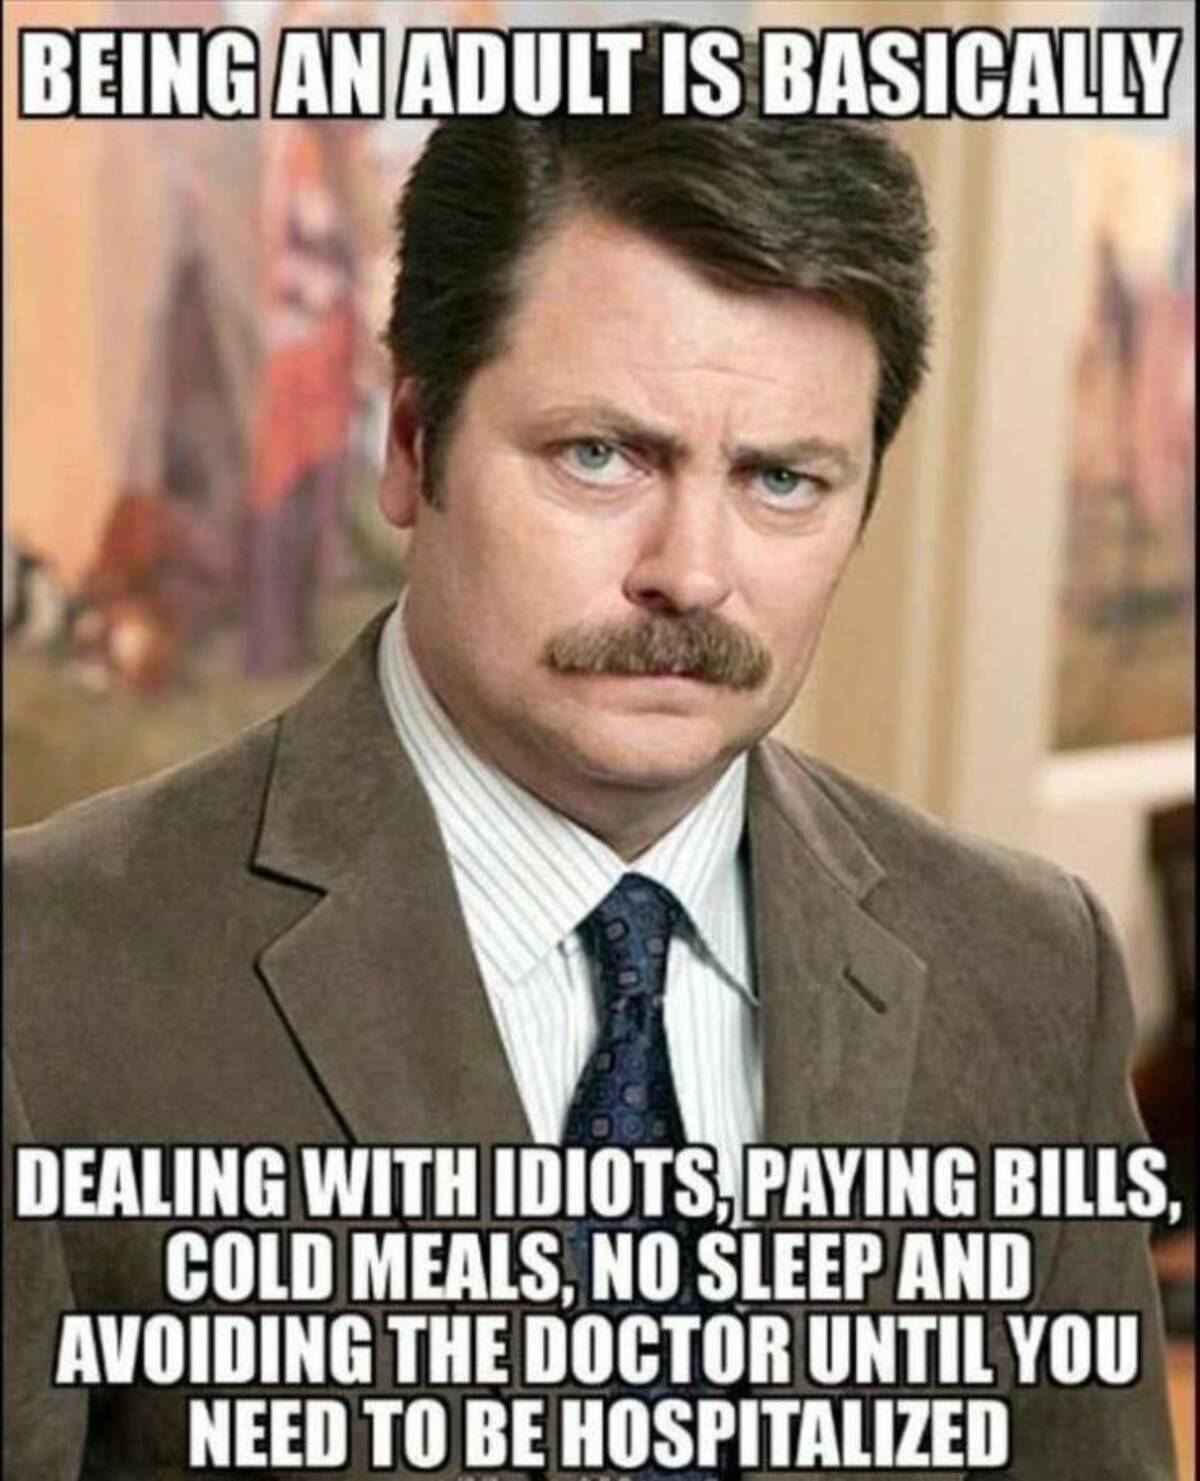 man with moustache meme - Being An Adult Is Basically Dealing With Idiots, Paying Bills, Cold Meals, No Sleep And Avoiding The Doctor Until You Need To Be Hospitalized